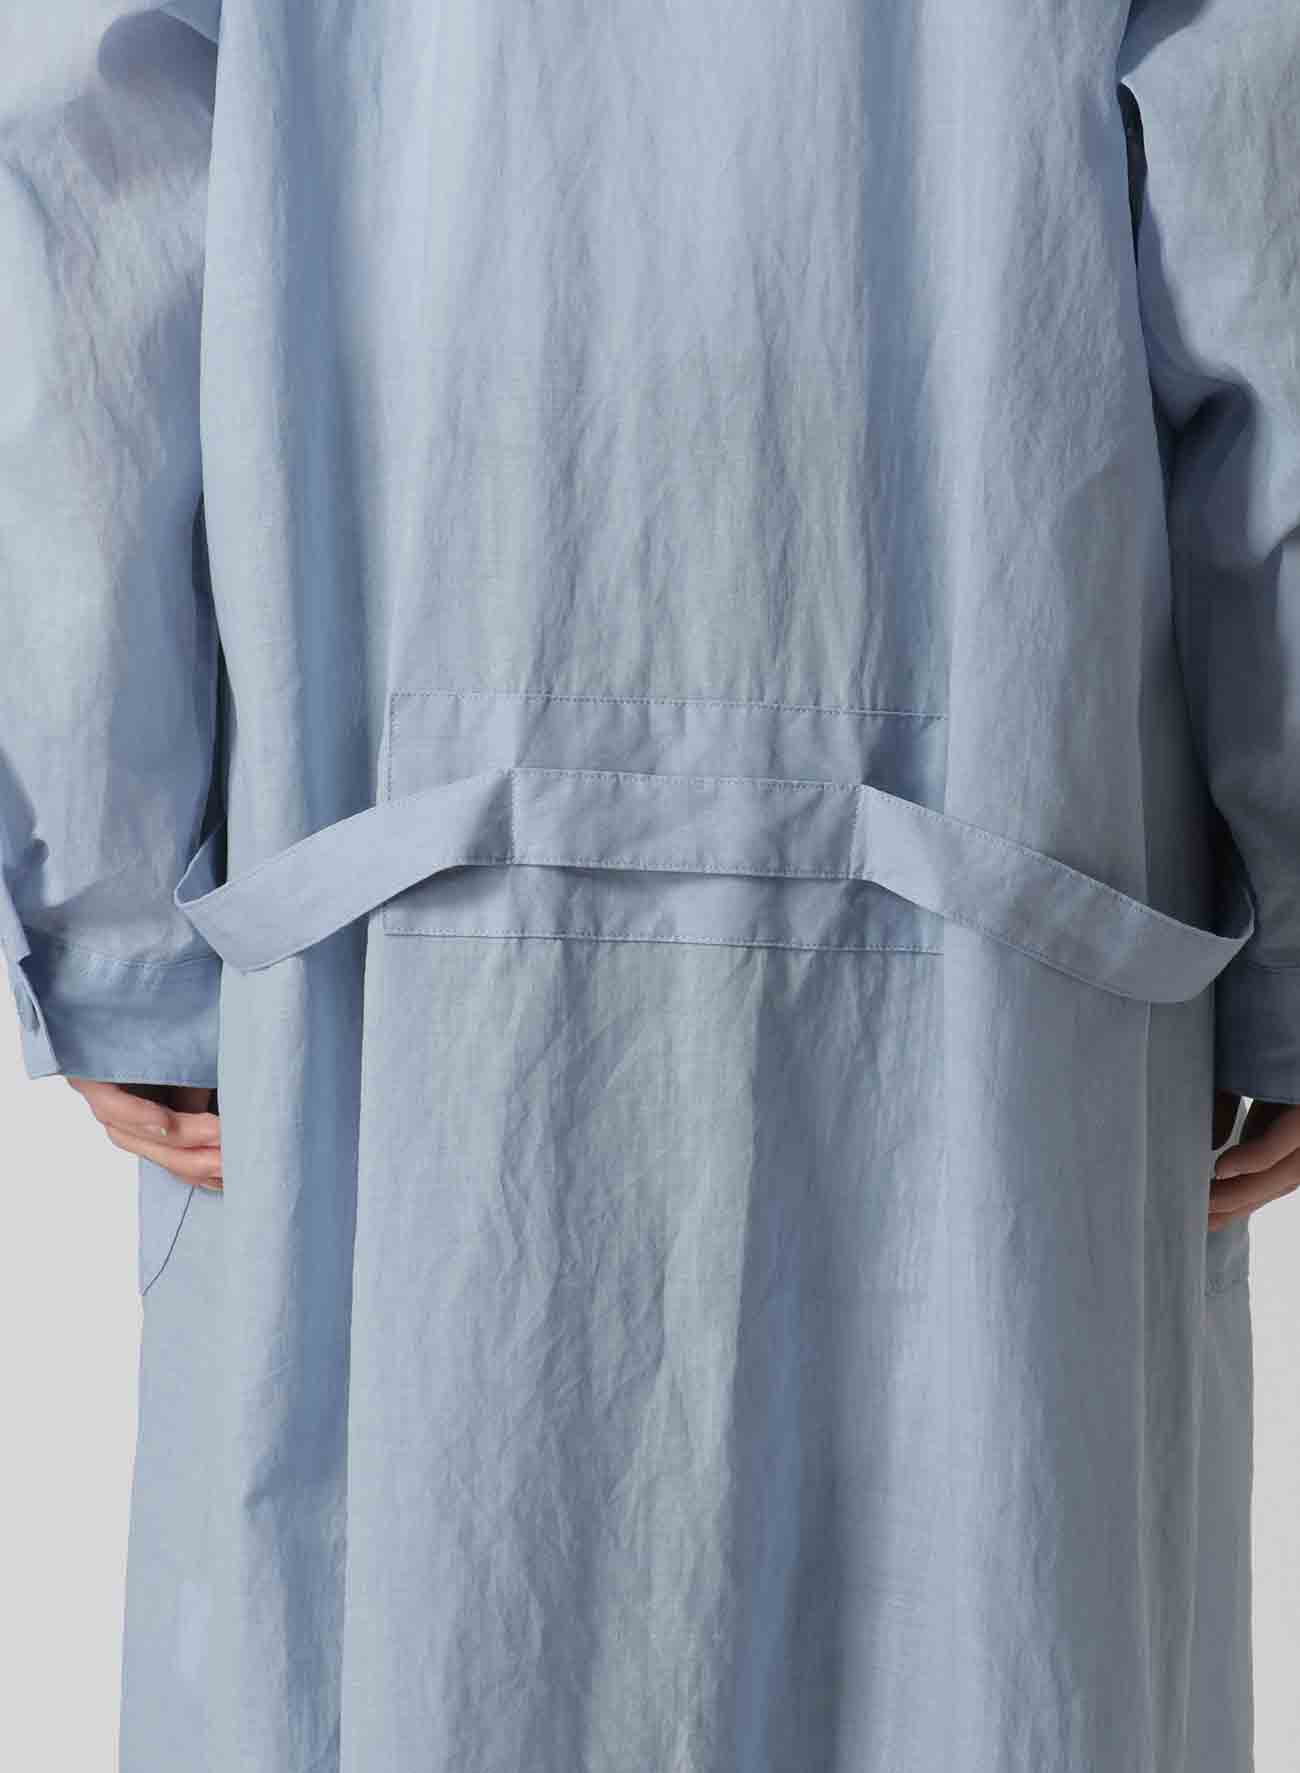 RAMIE OIL LAWN SURGICAL GOWN